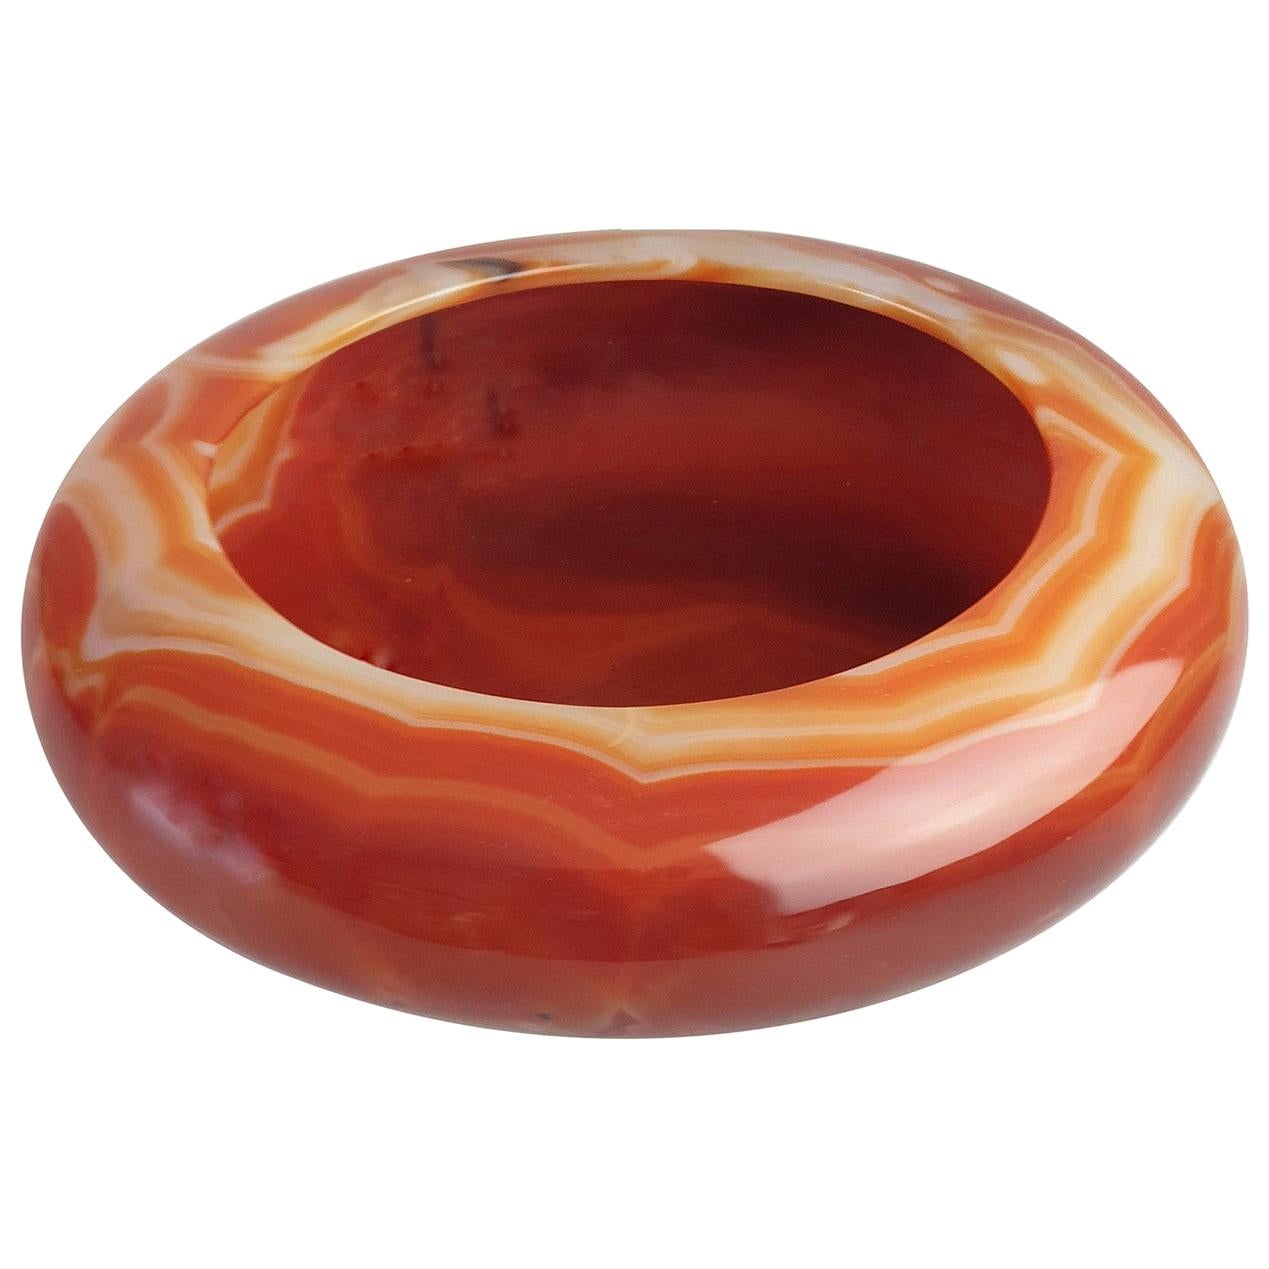 Small Carnelian Agate Empty-Pocket Bowl For Sale